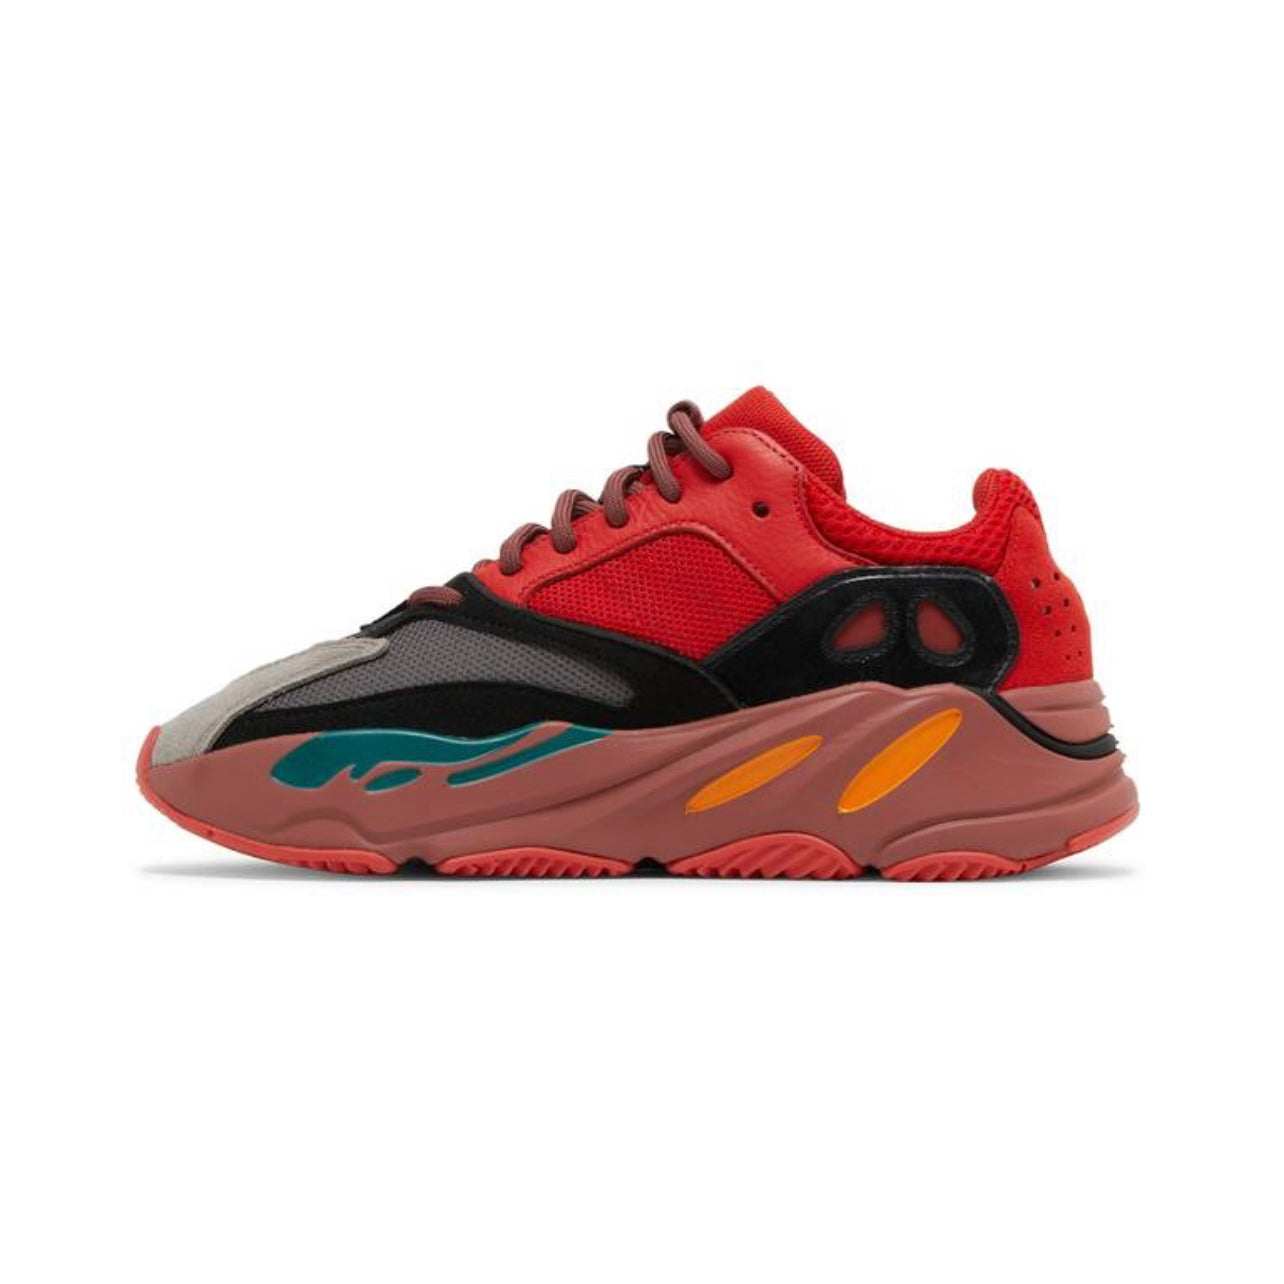 Size 11 - Adidas Yeezy Boost 700 "Hi-Res Red"